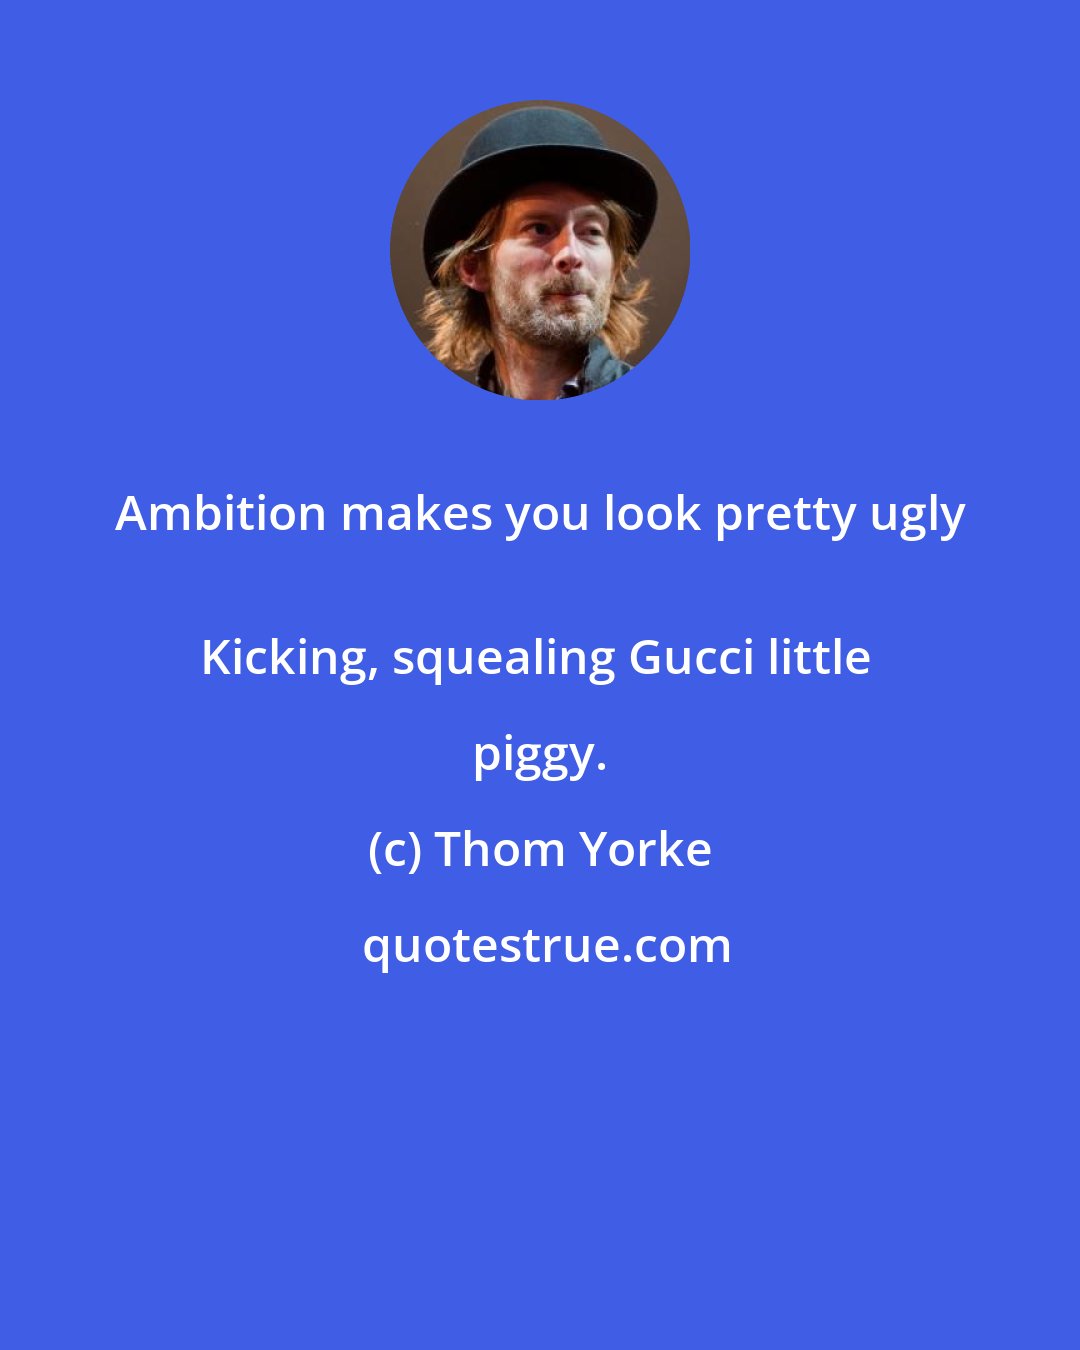 Thom Yorke: Ambition makes you look pretty ugly 
Kicking, squealing Gucci little piggy.